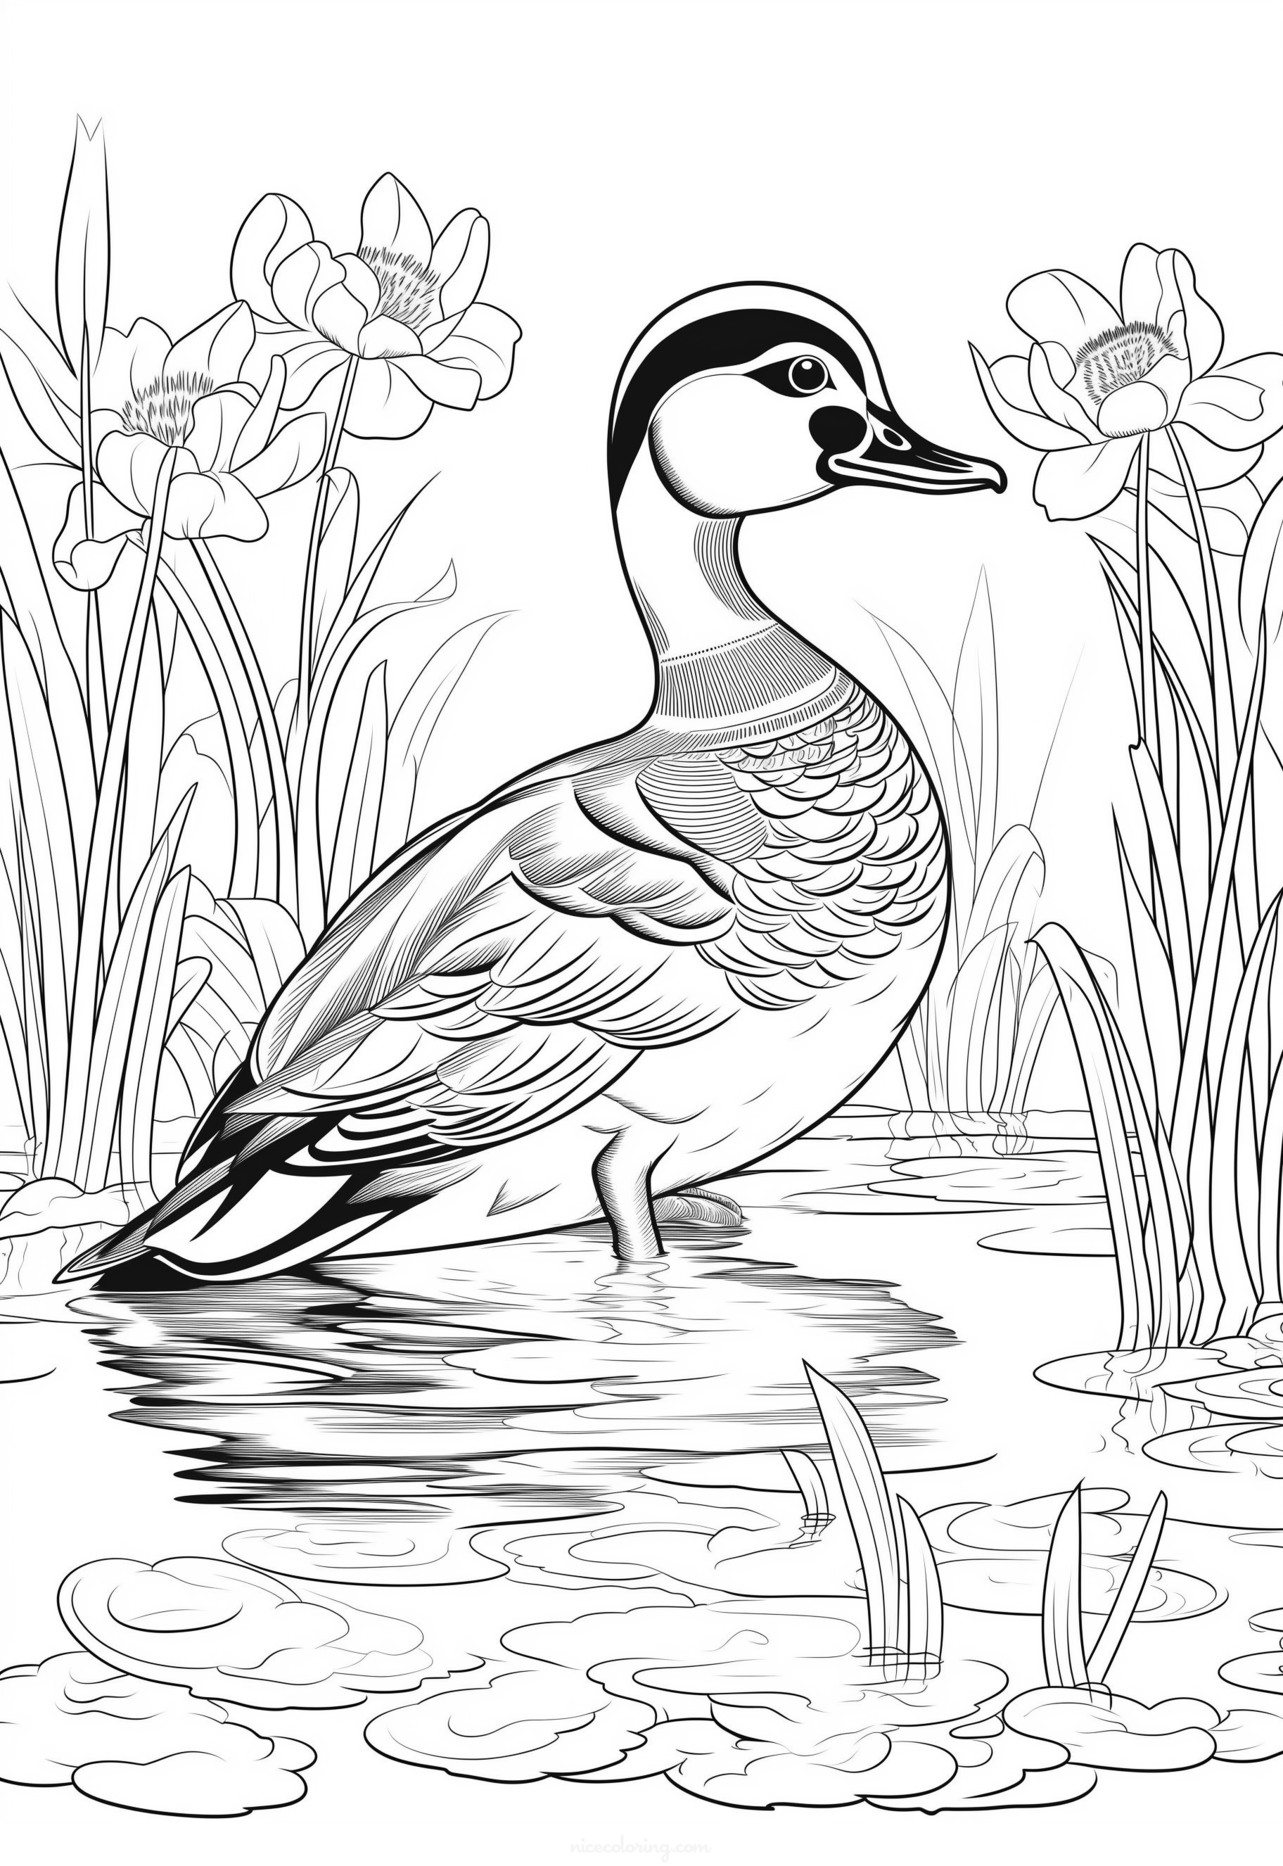 Bird perched on a branch coloring page